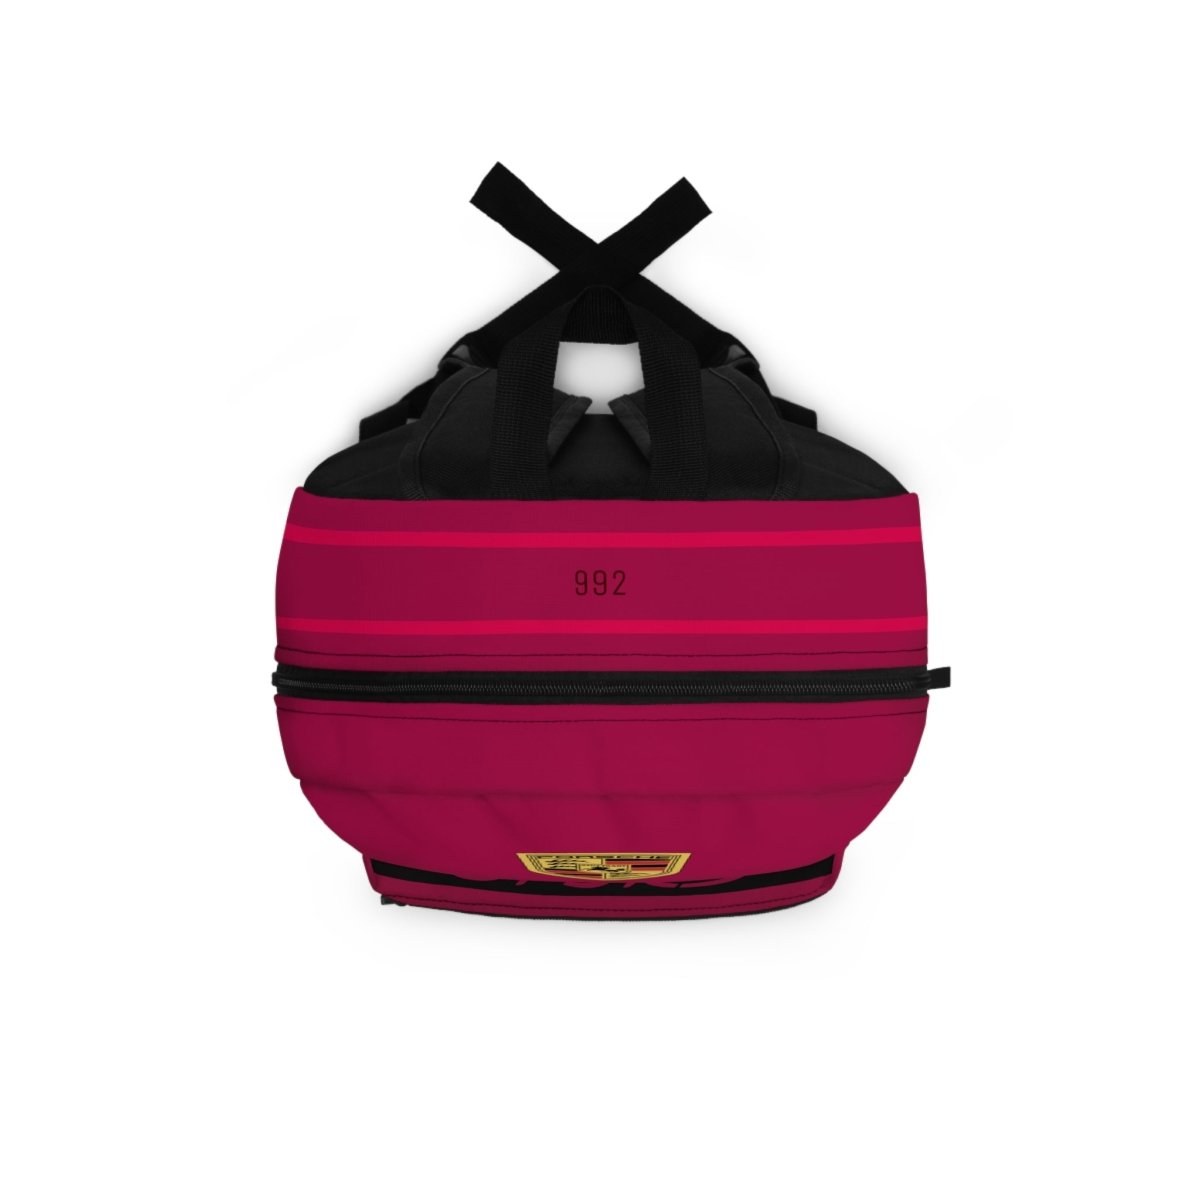 Porsche Ruby Star GT3RS 911 (992) Backpack - Limited Edition - 5 Produced - AI Print Spot - Bags